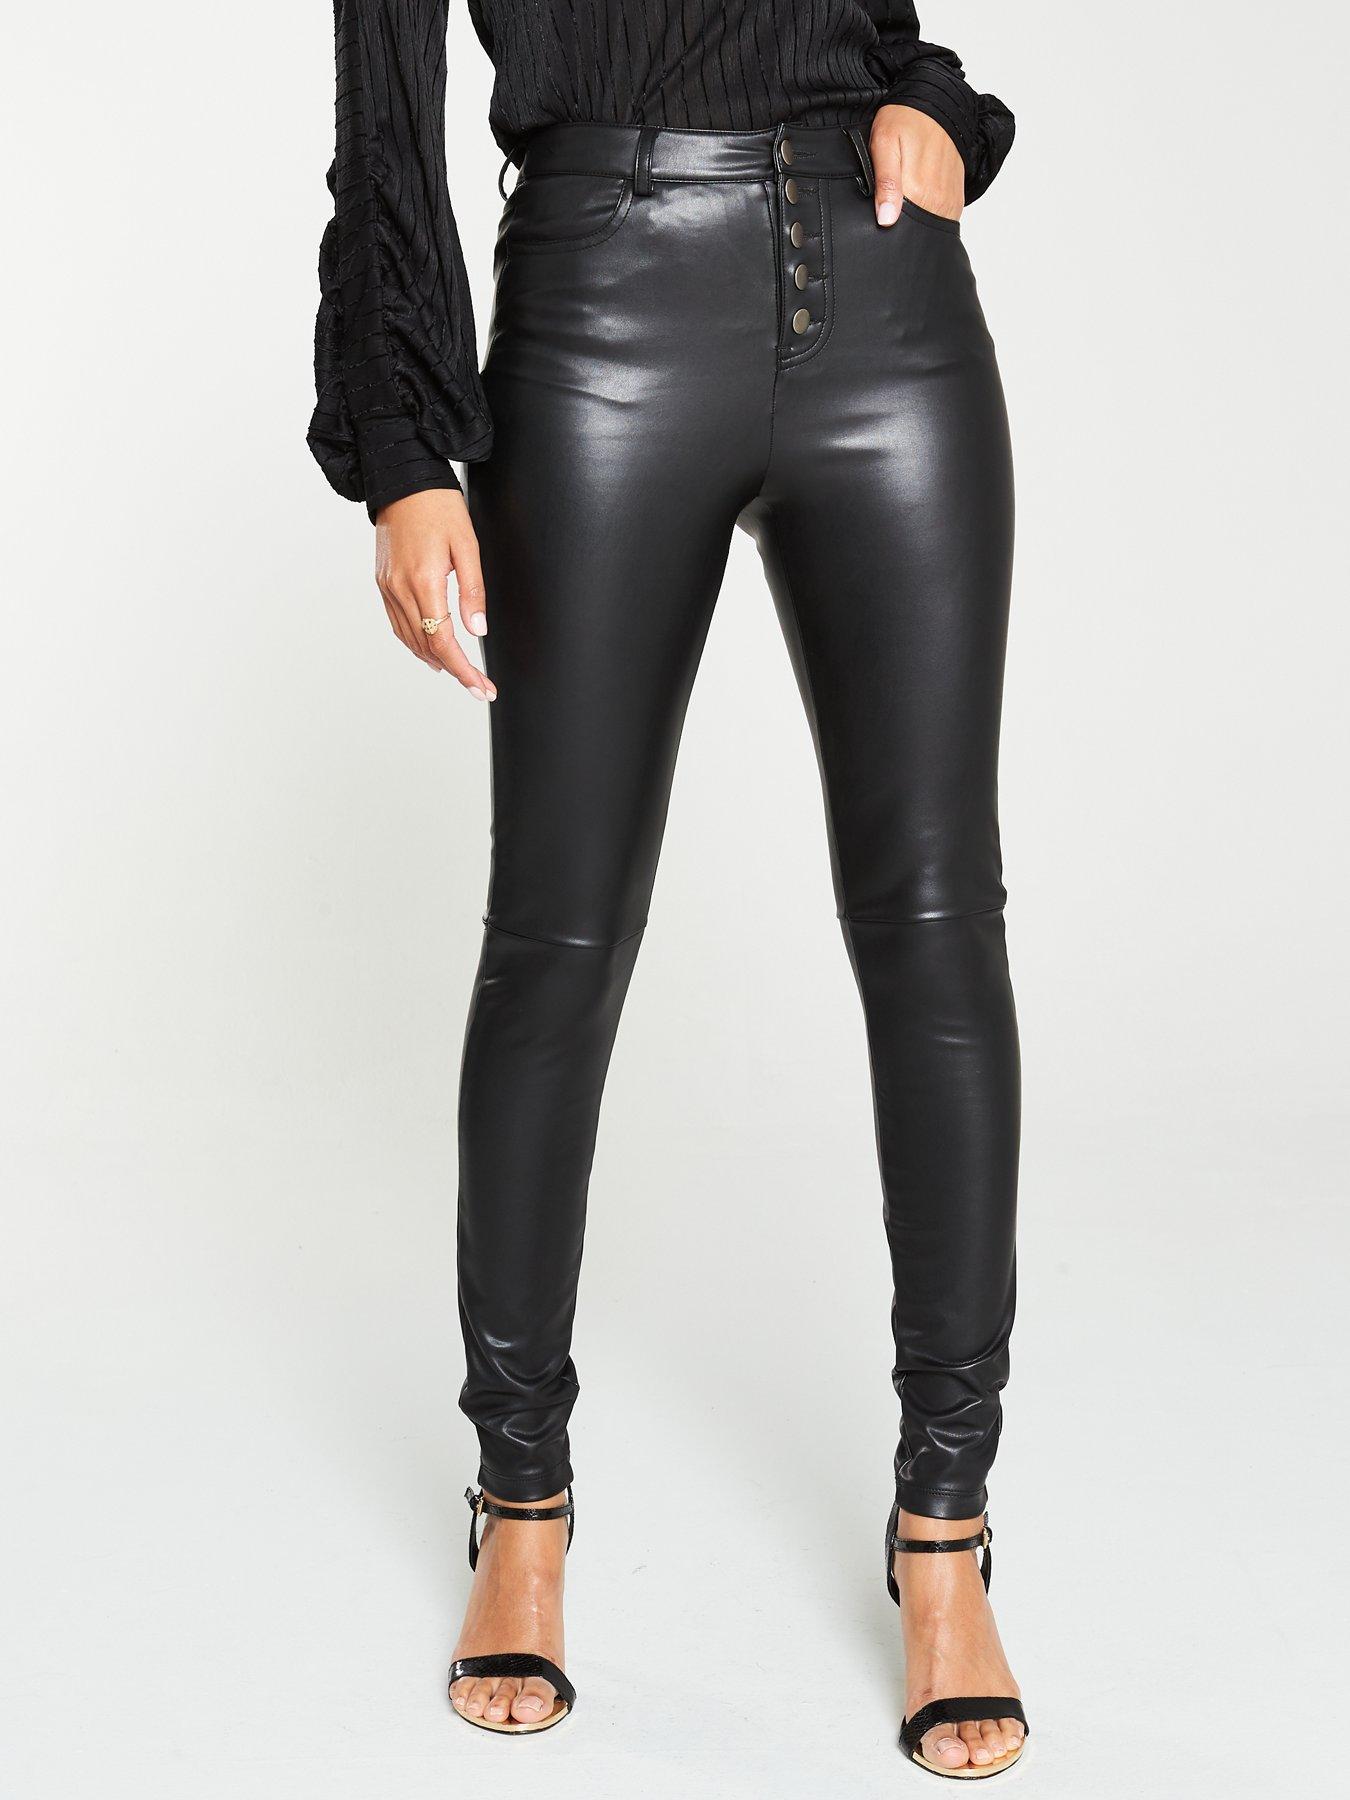 leather look trousers with belt loops